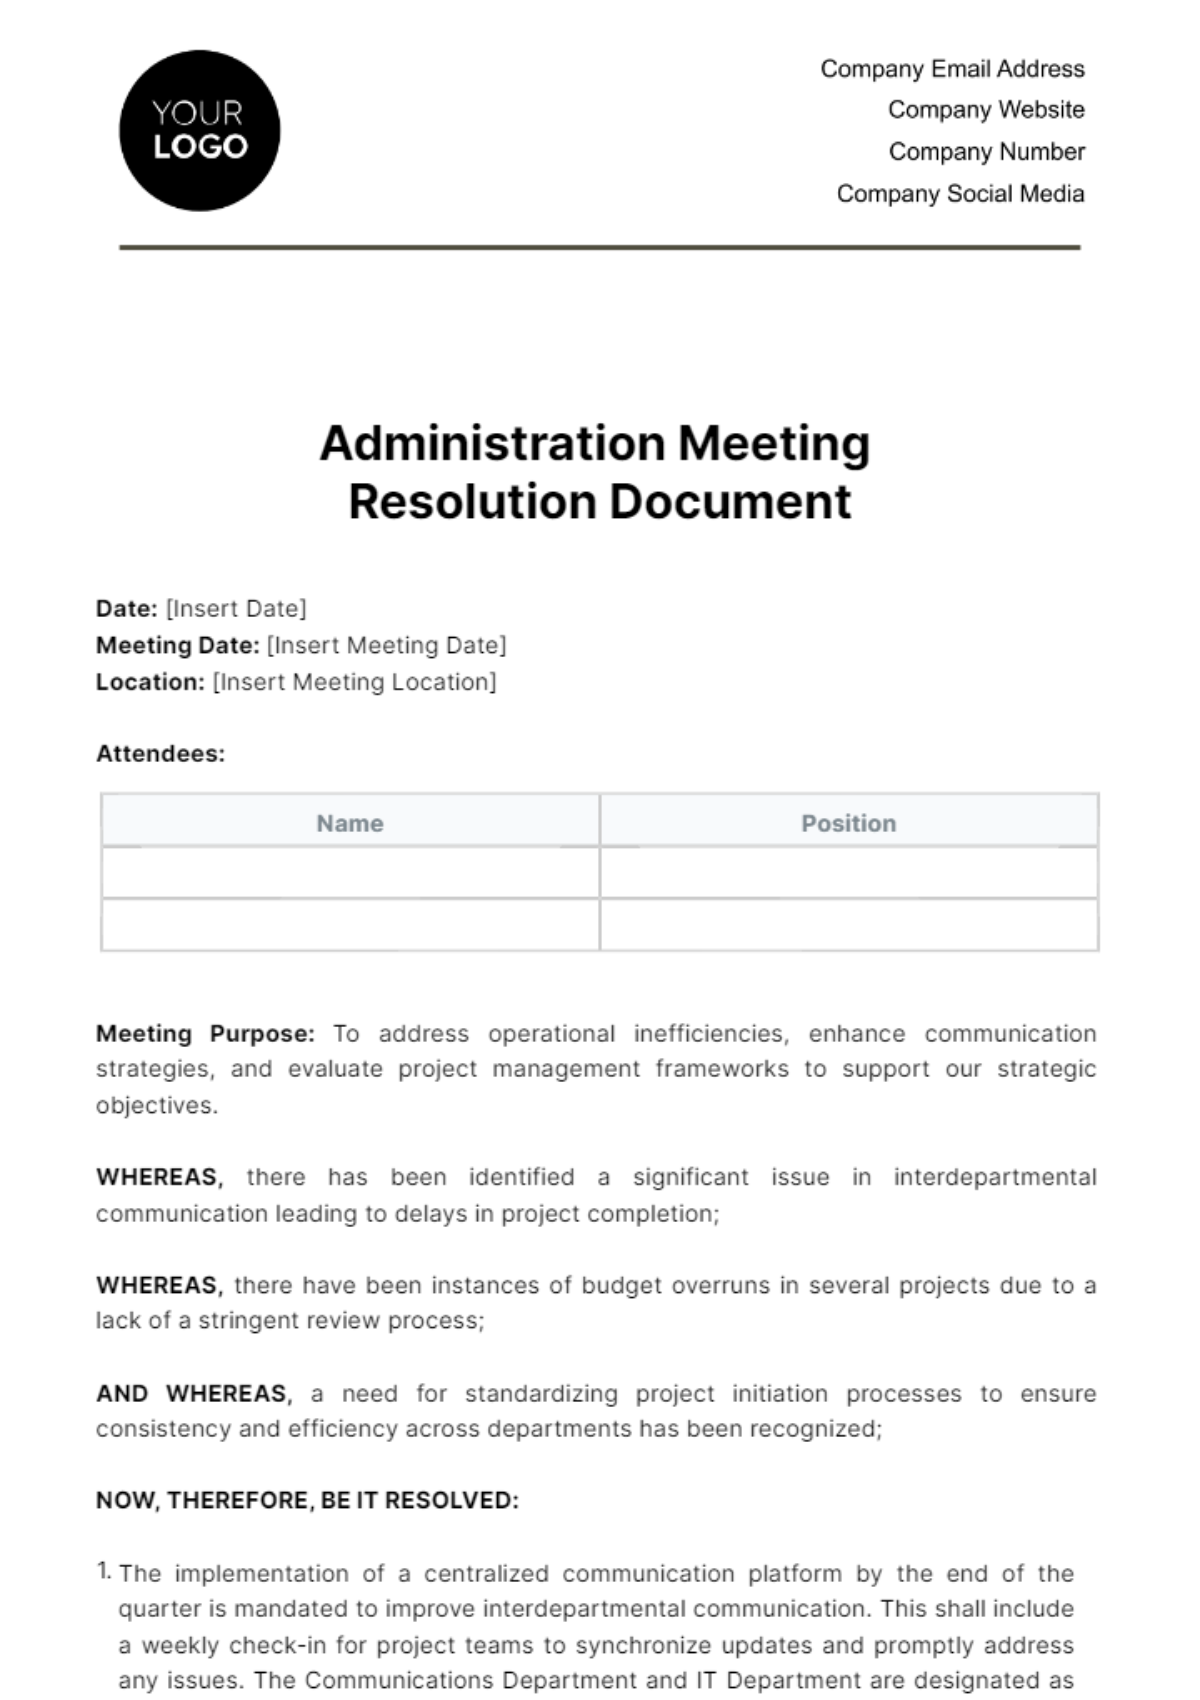 Free Administration Meeting Resolution Document Template